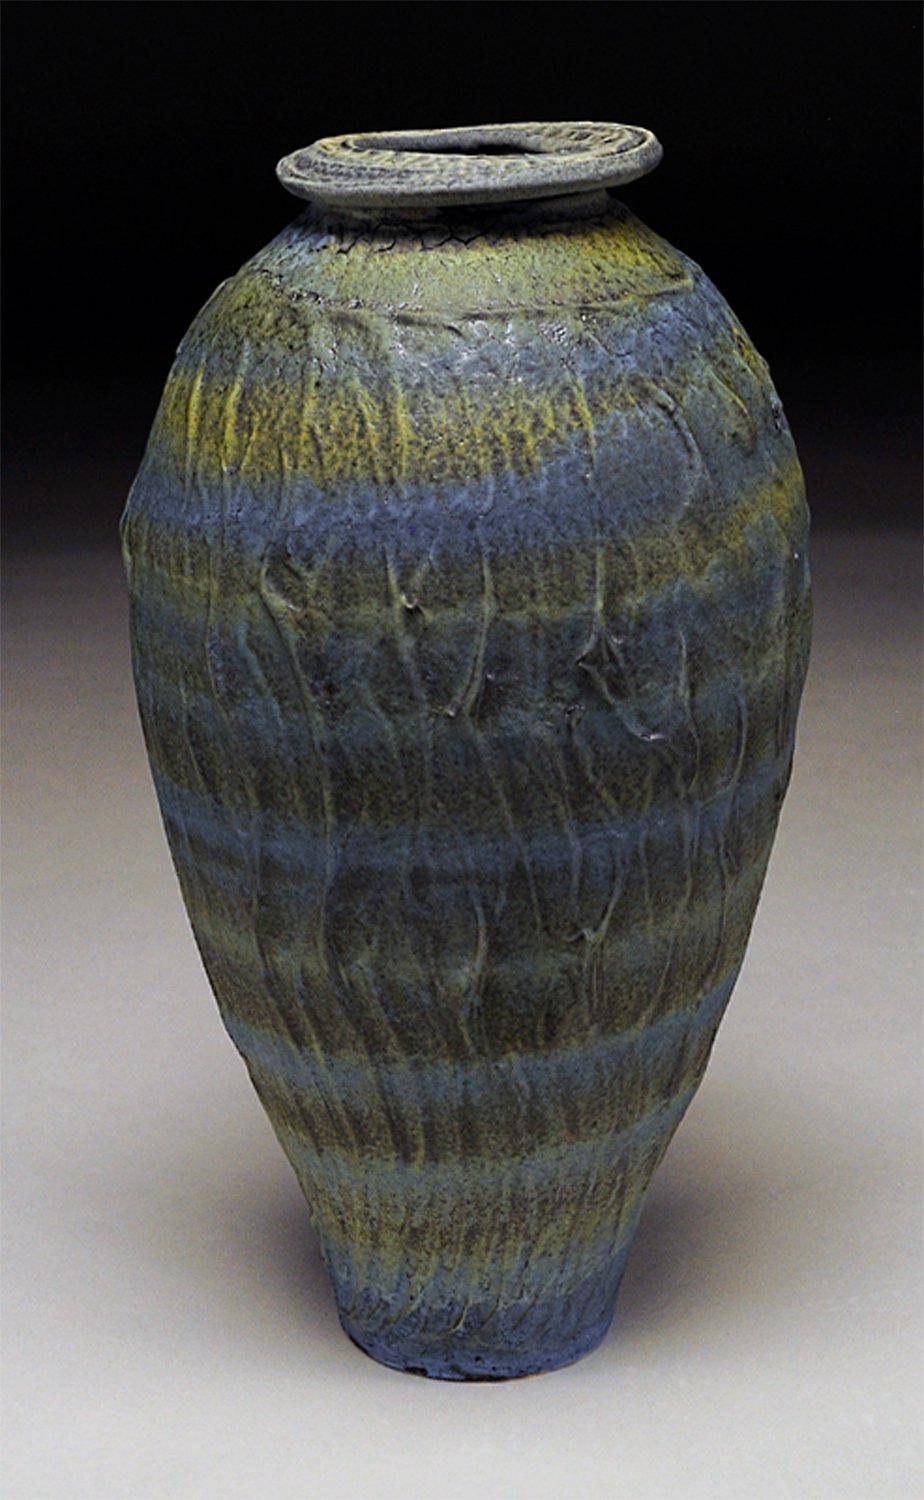 Earthenware urn blue and yellow bands 12.5x7